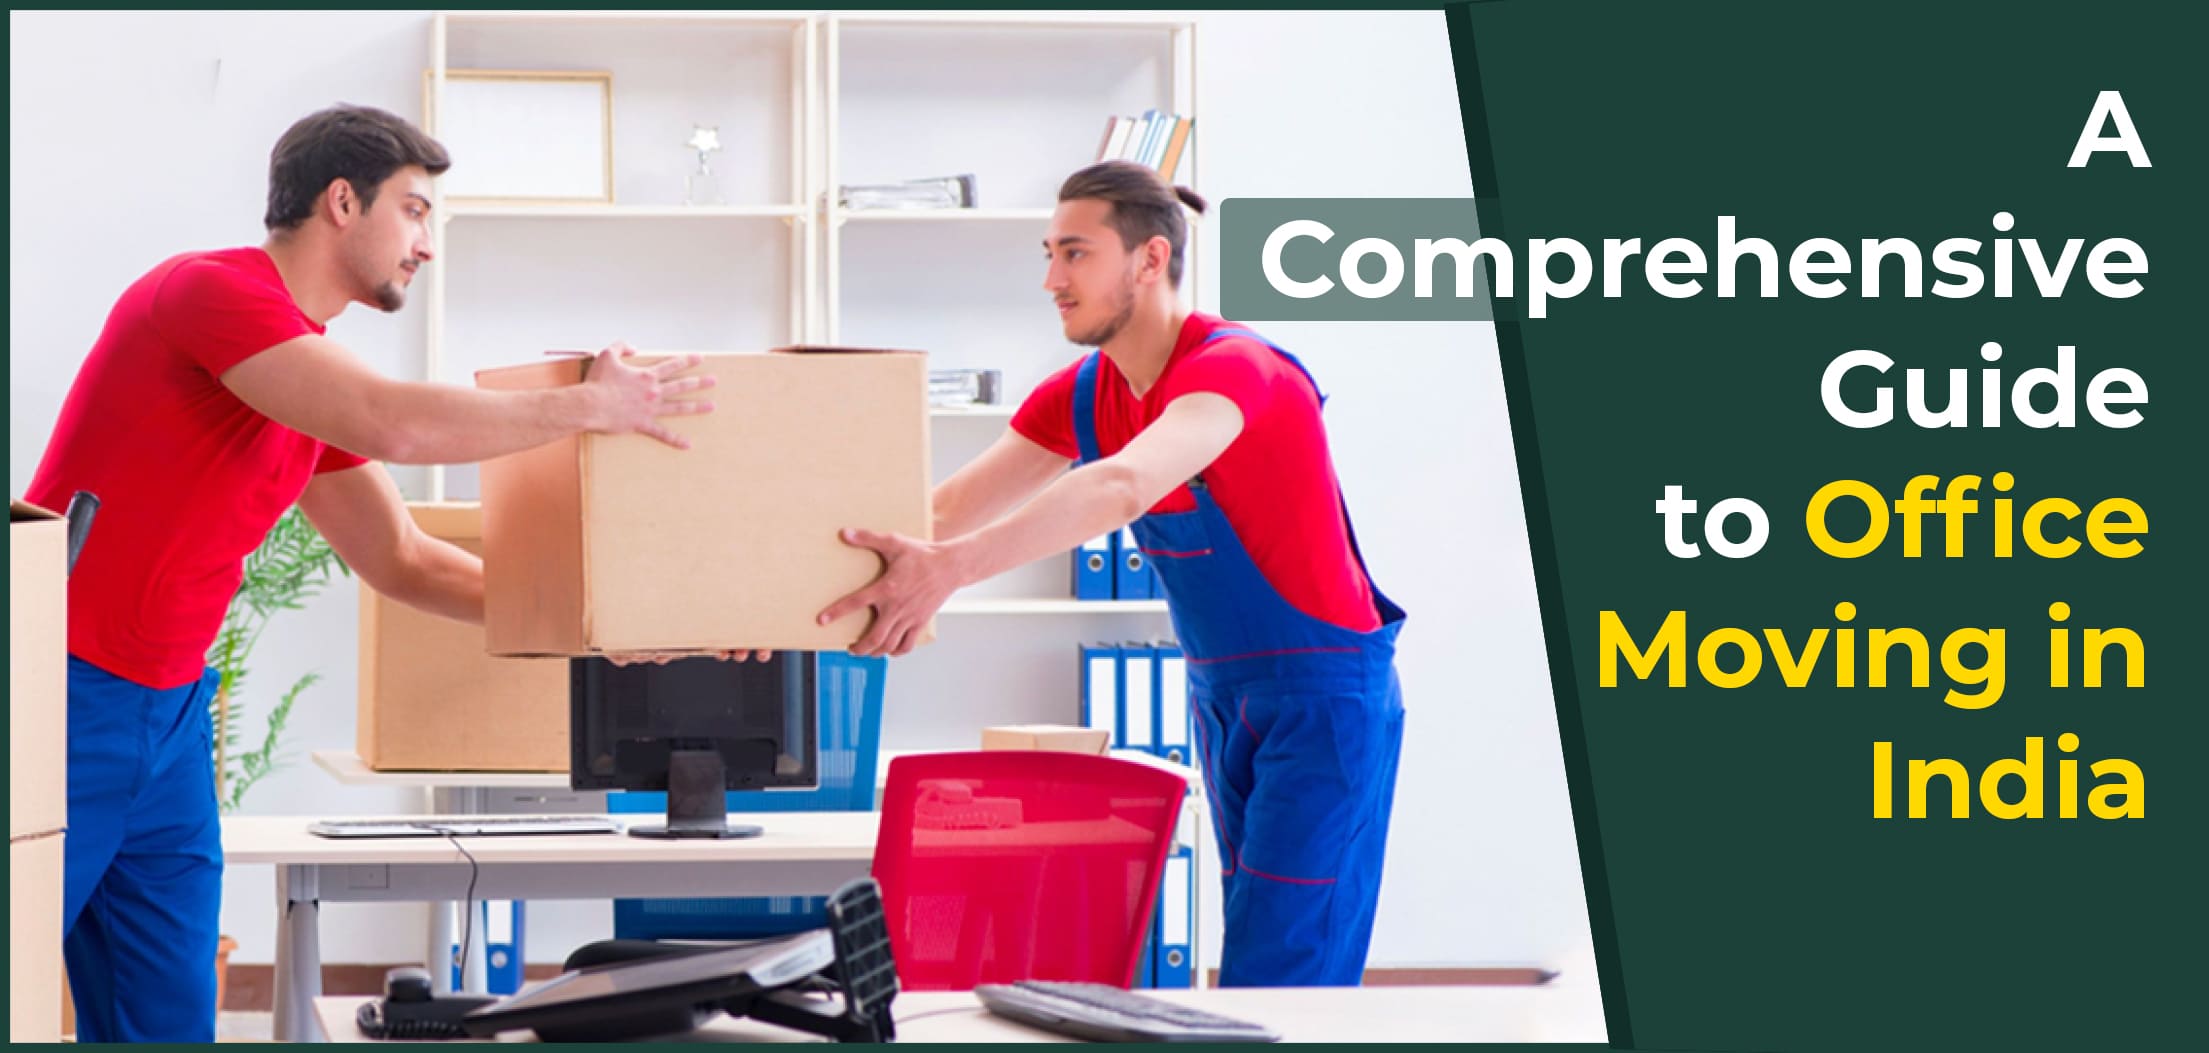 A Comprehensive Guide to Office Moving in India